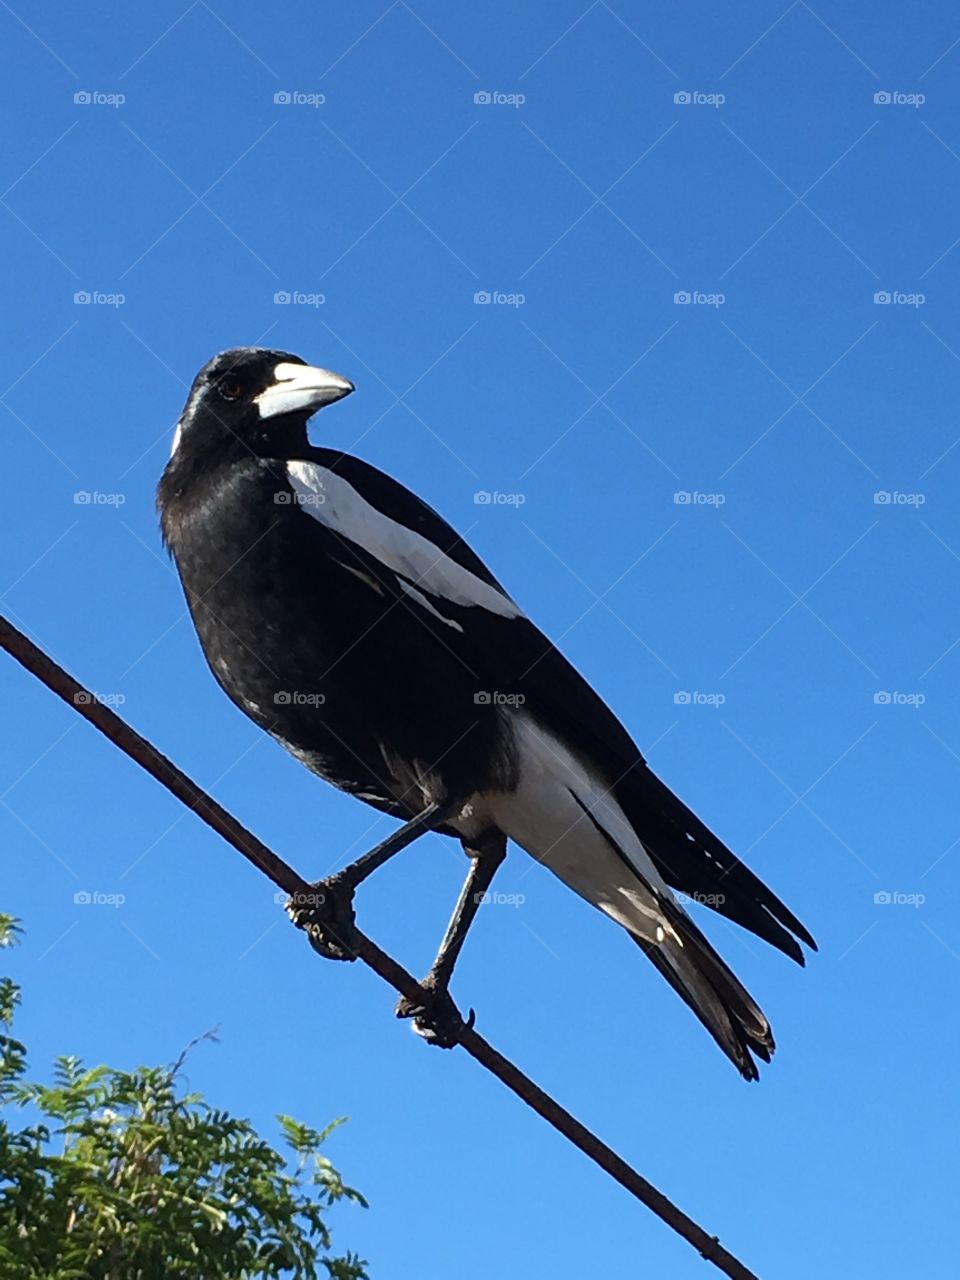 Alert magpie, standing on a high clothesline wire, contrasted beautifully against a bright clear blue sky closeup